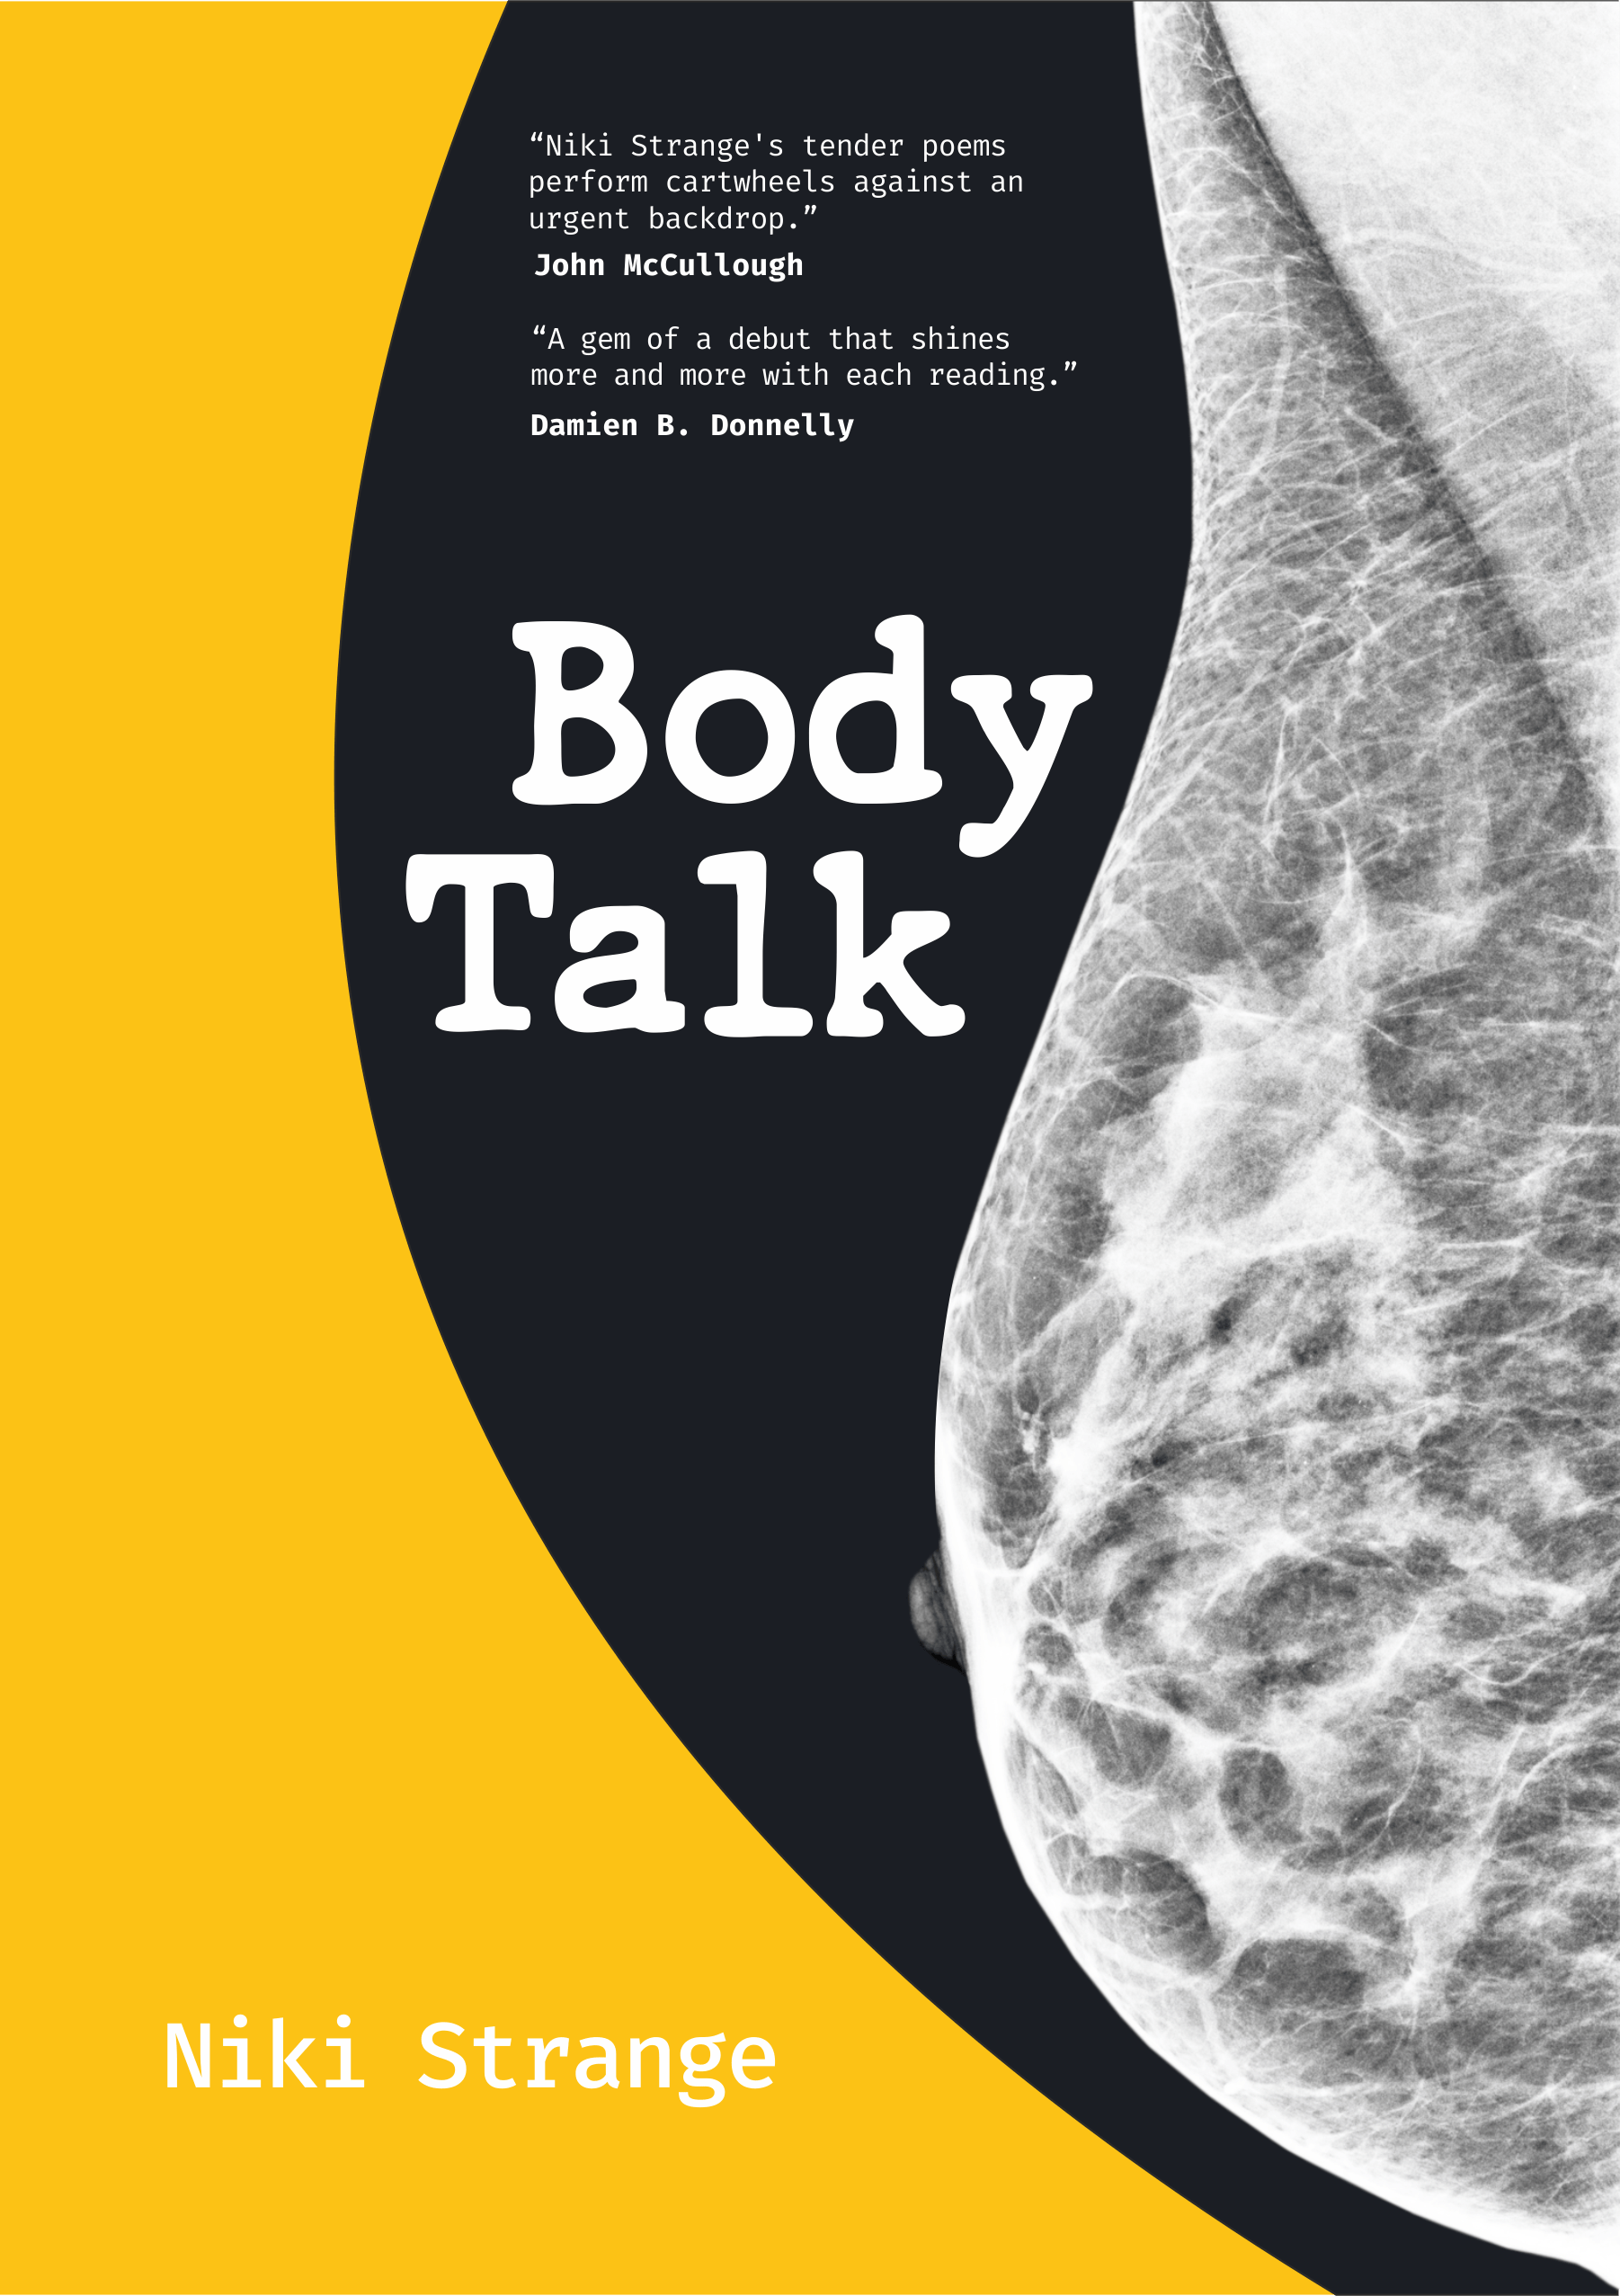 Cover of poetry pamphlet Body Talk'